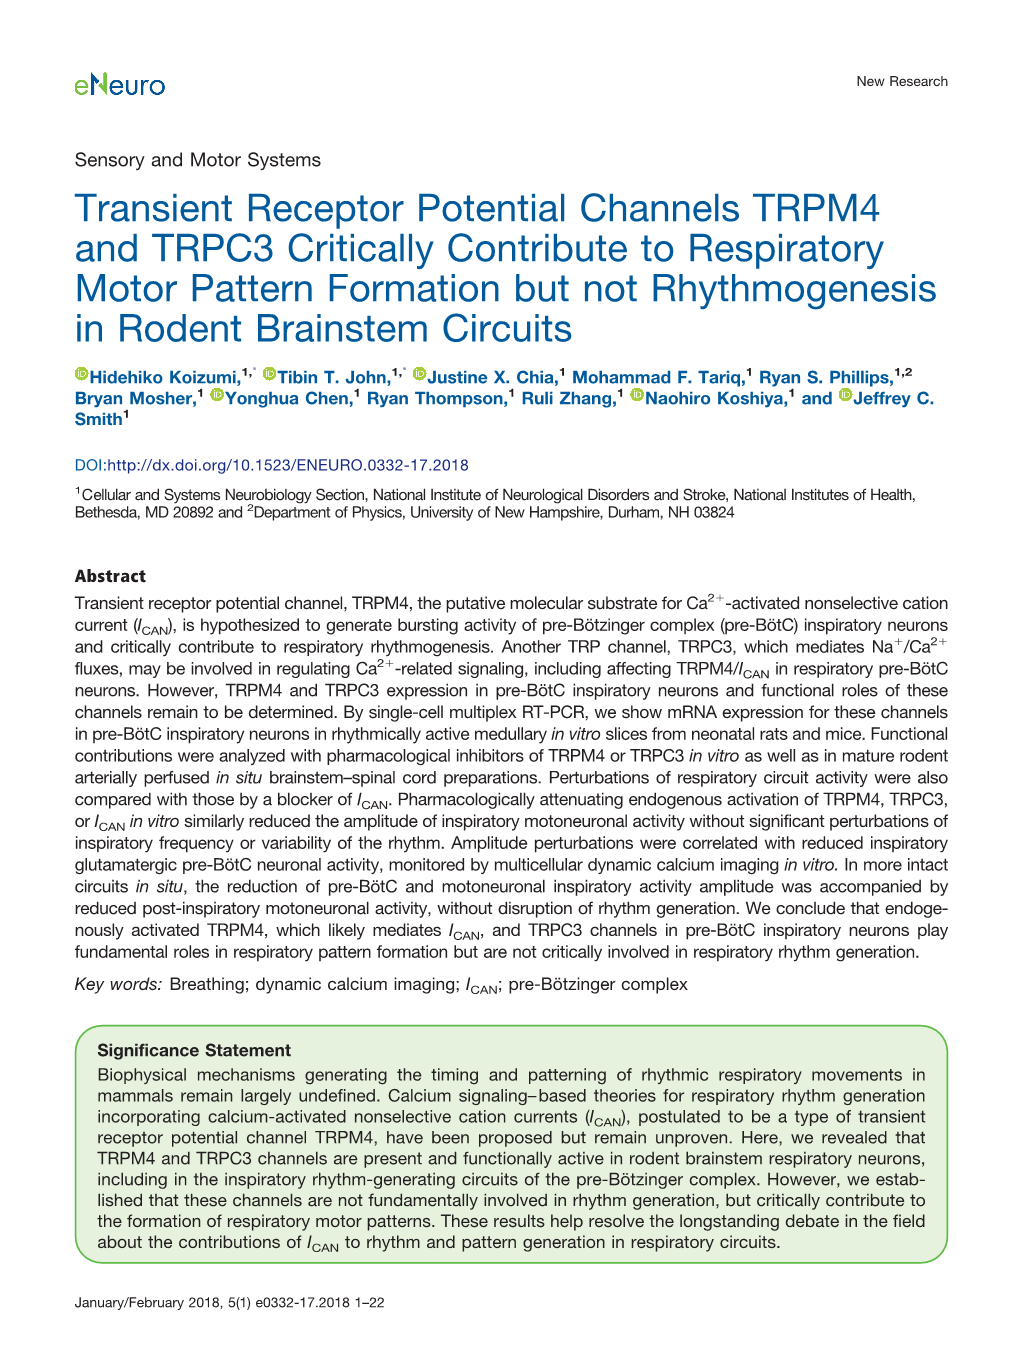 Transient Receptor Potential Channels TRPM4 and TRPC3 Critically Contribute to Respiratory Motor Pattern Formation but Not Rhythmogenesis in Rodent Brainstem Circuits